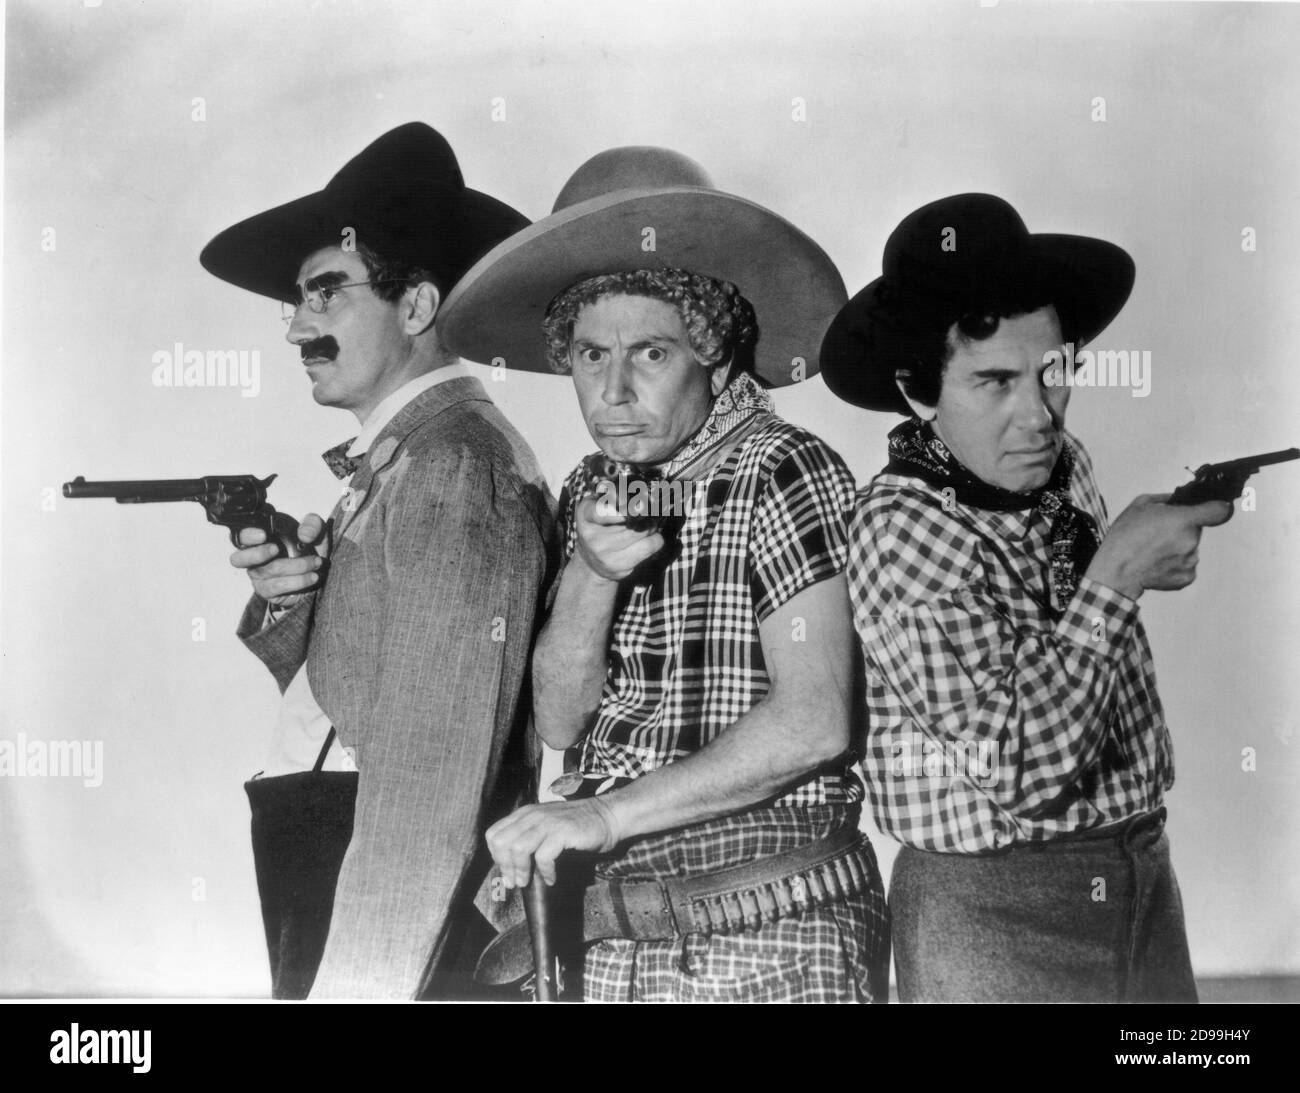 1940 , USA : The MARX  BROTHERS  : Harpo , Chico and Groucho  . Pubblicity still for movie GO WEST ( 1940 ) by Edward Buzzell- WESTERN - COWBOY - pistola - revolver ----   Archivio GBB Stock Photo